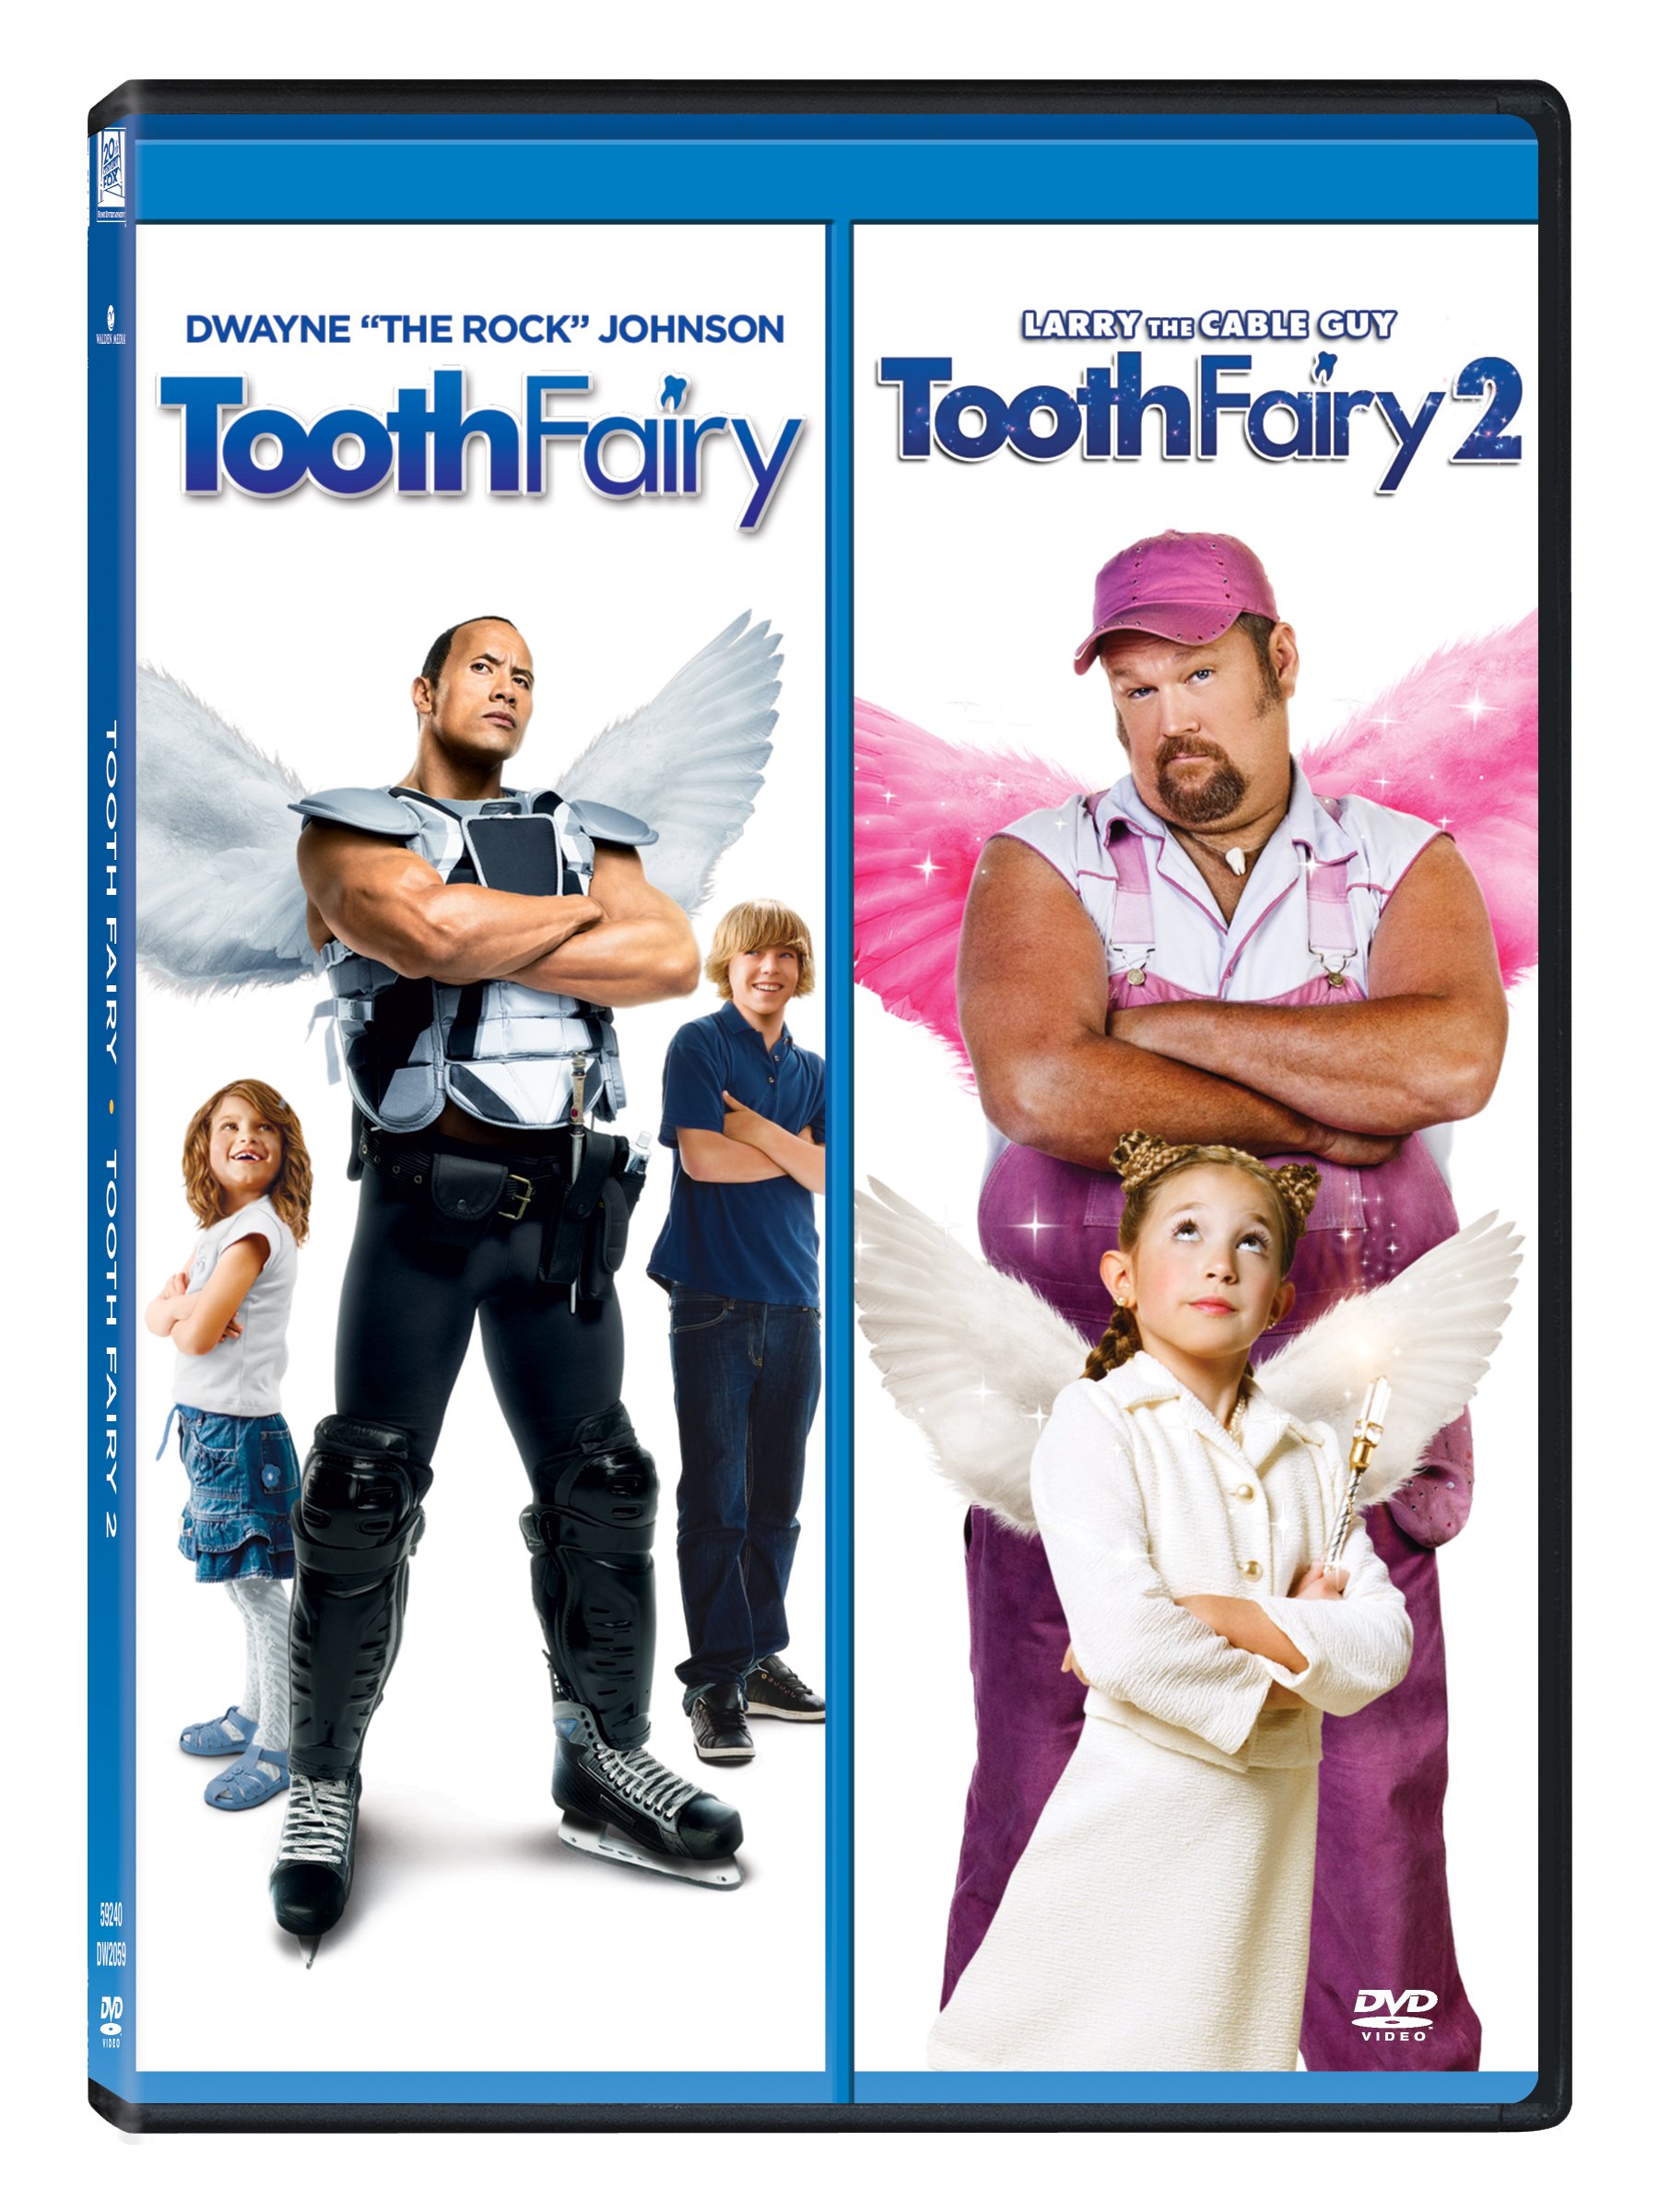 tooth-fairy-1-2-2-disc-box-set-movie-purchase-or-watch-online